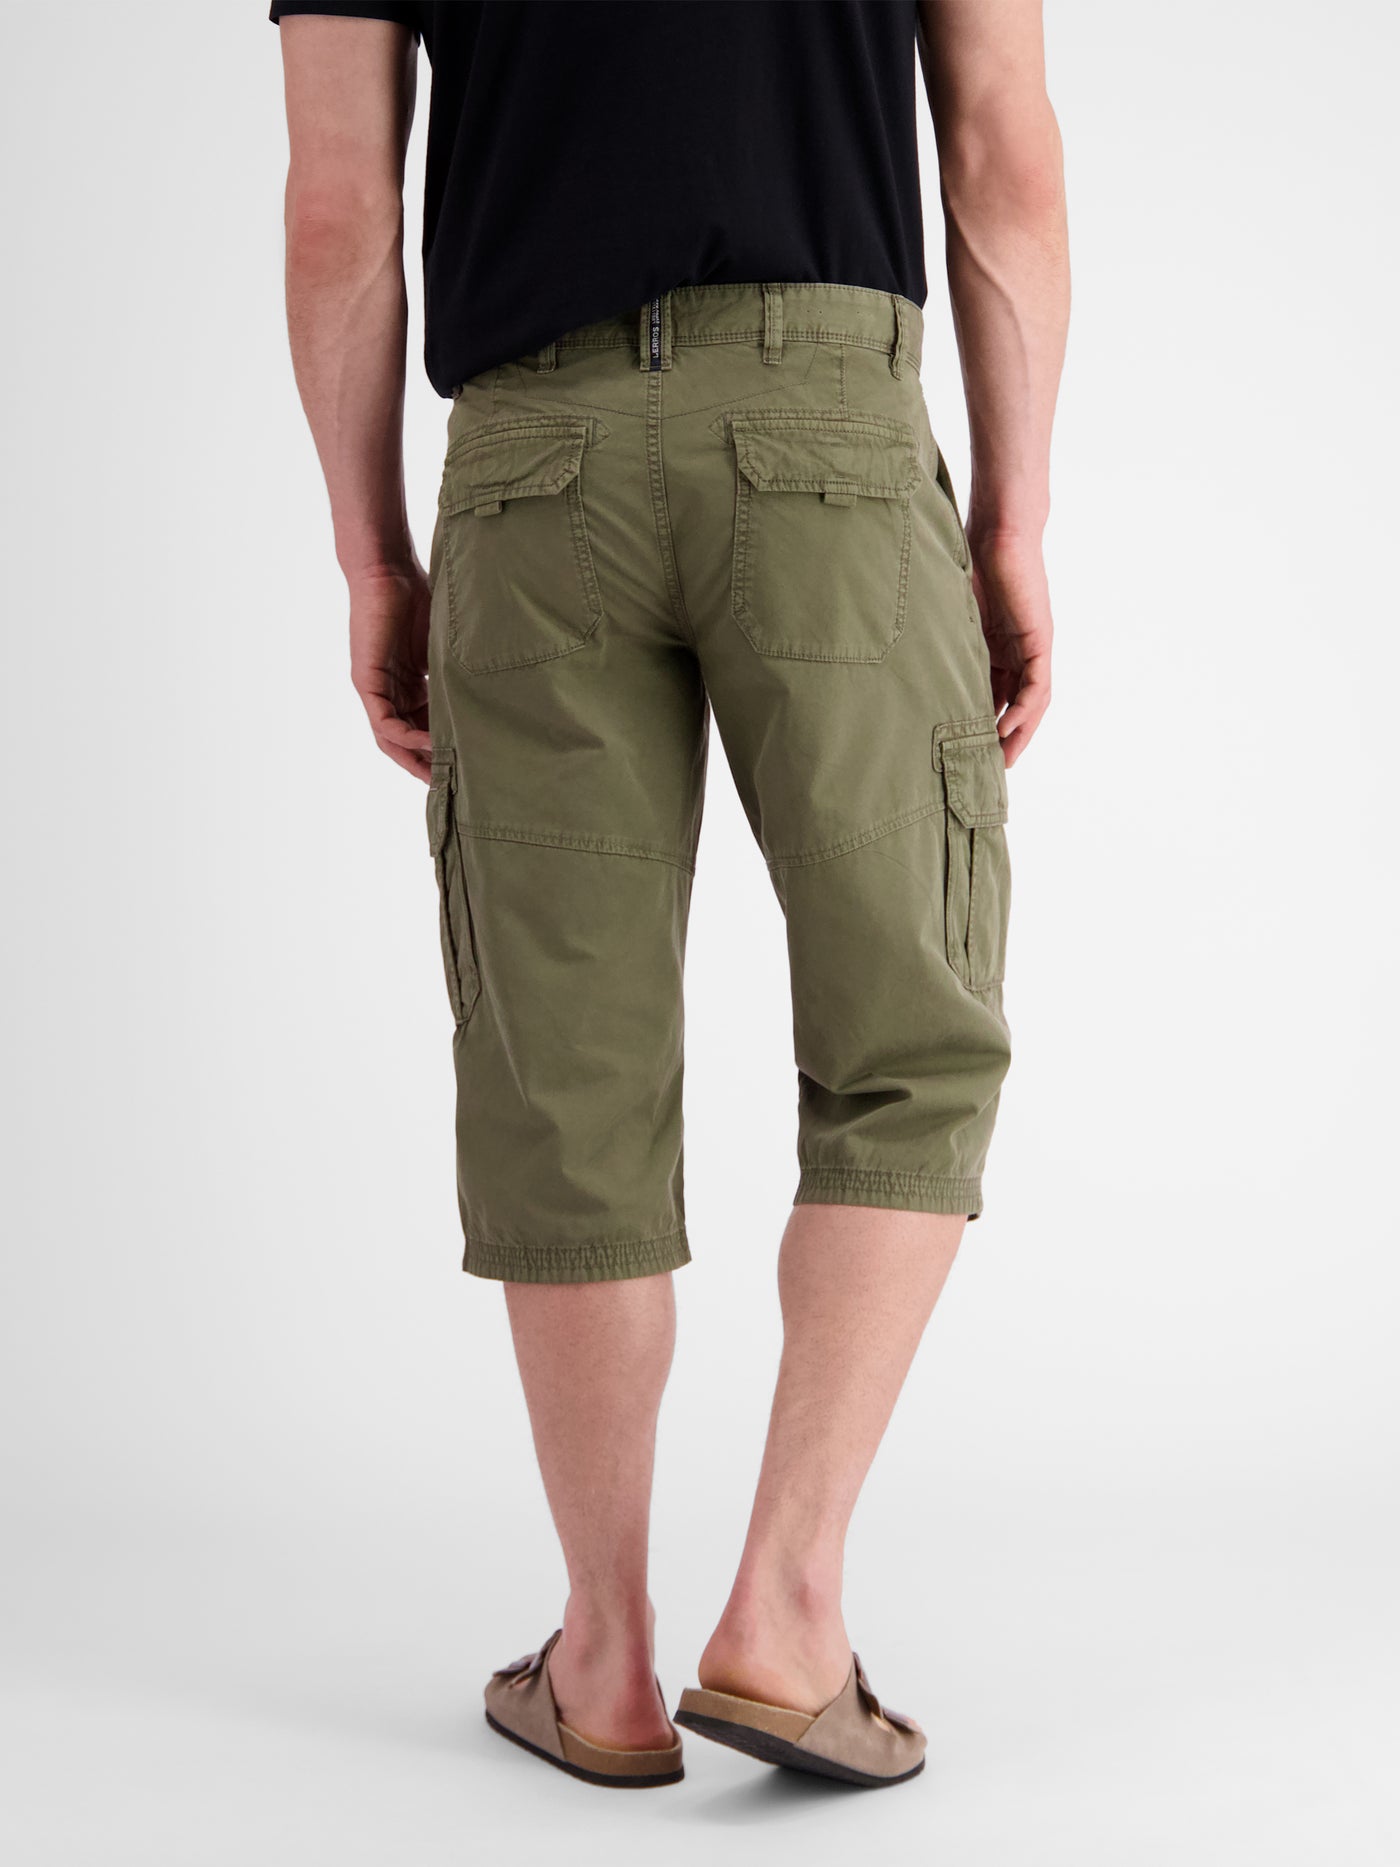 Long cargo Bermuda shorts with patch pockets